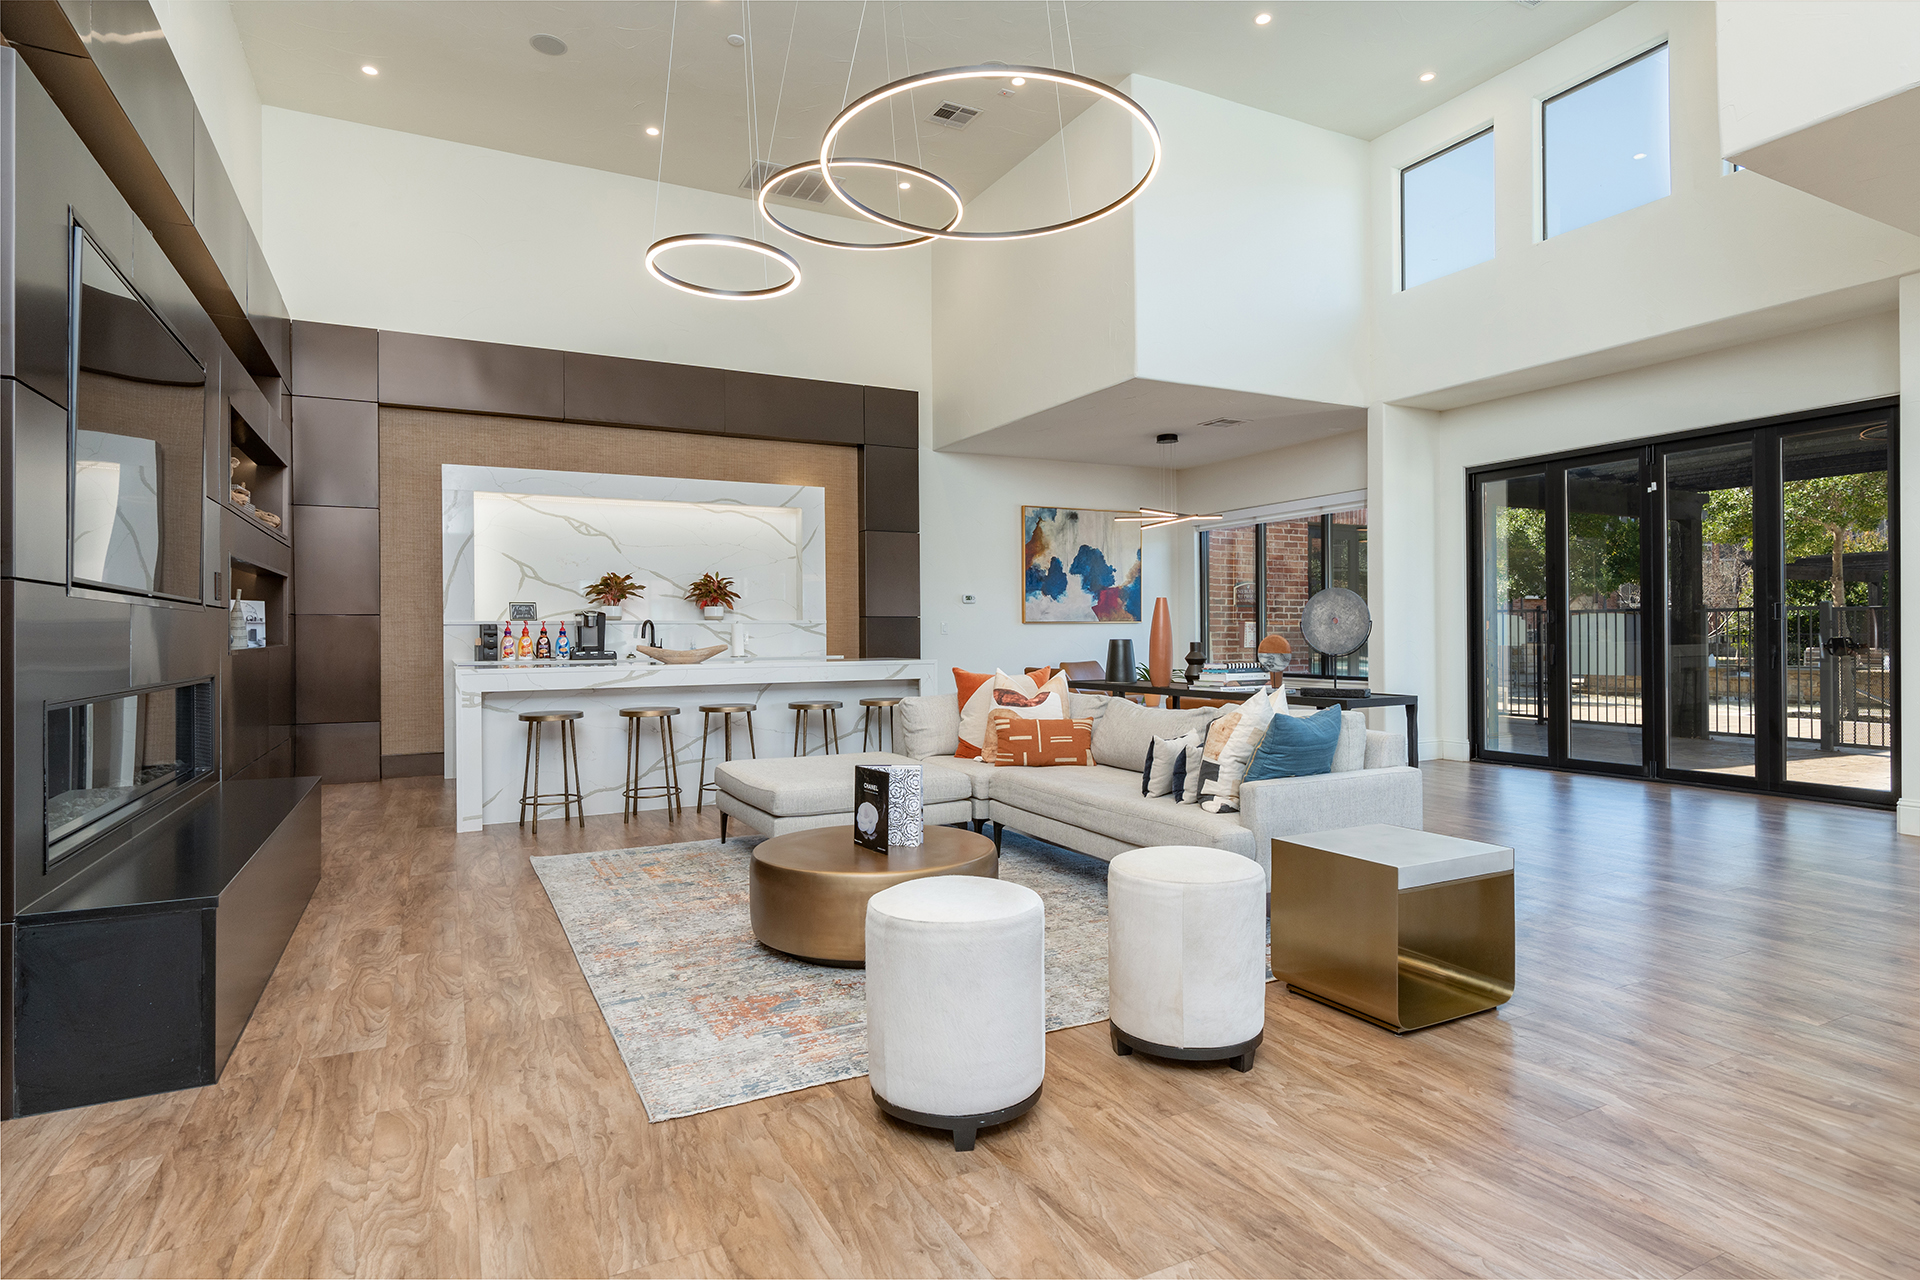 Modern living space featuring a large seating area, bar with stools, contemporary lighting, and floor-to-ceiling windows offering plenty of natural light. This exquisite multi-family real estate investment also includes abstract wall art and a patterned rug for a sophisticated ambiance.